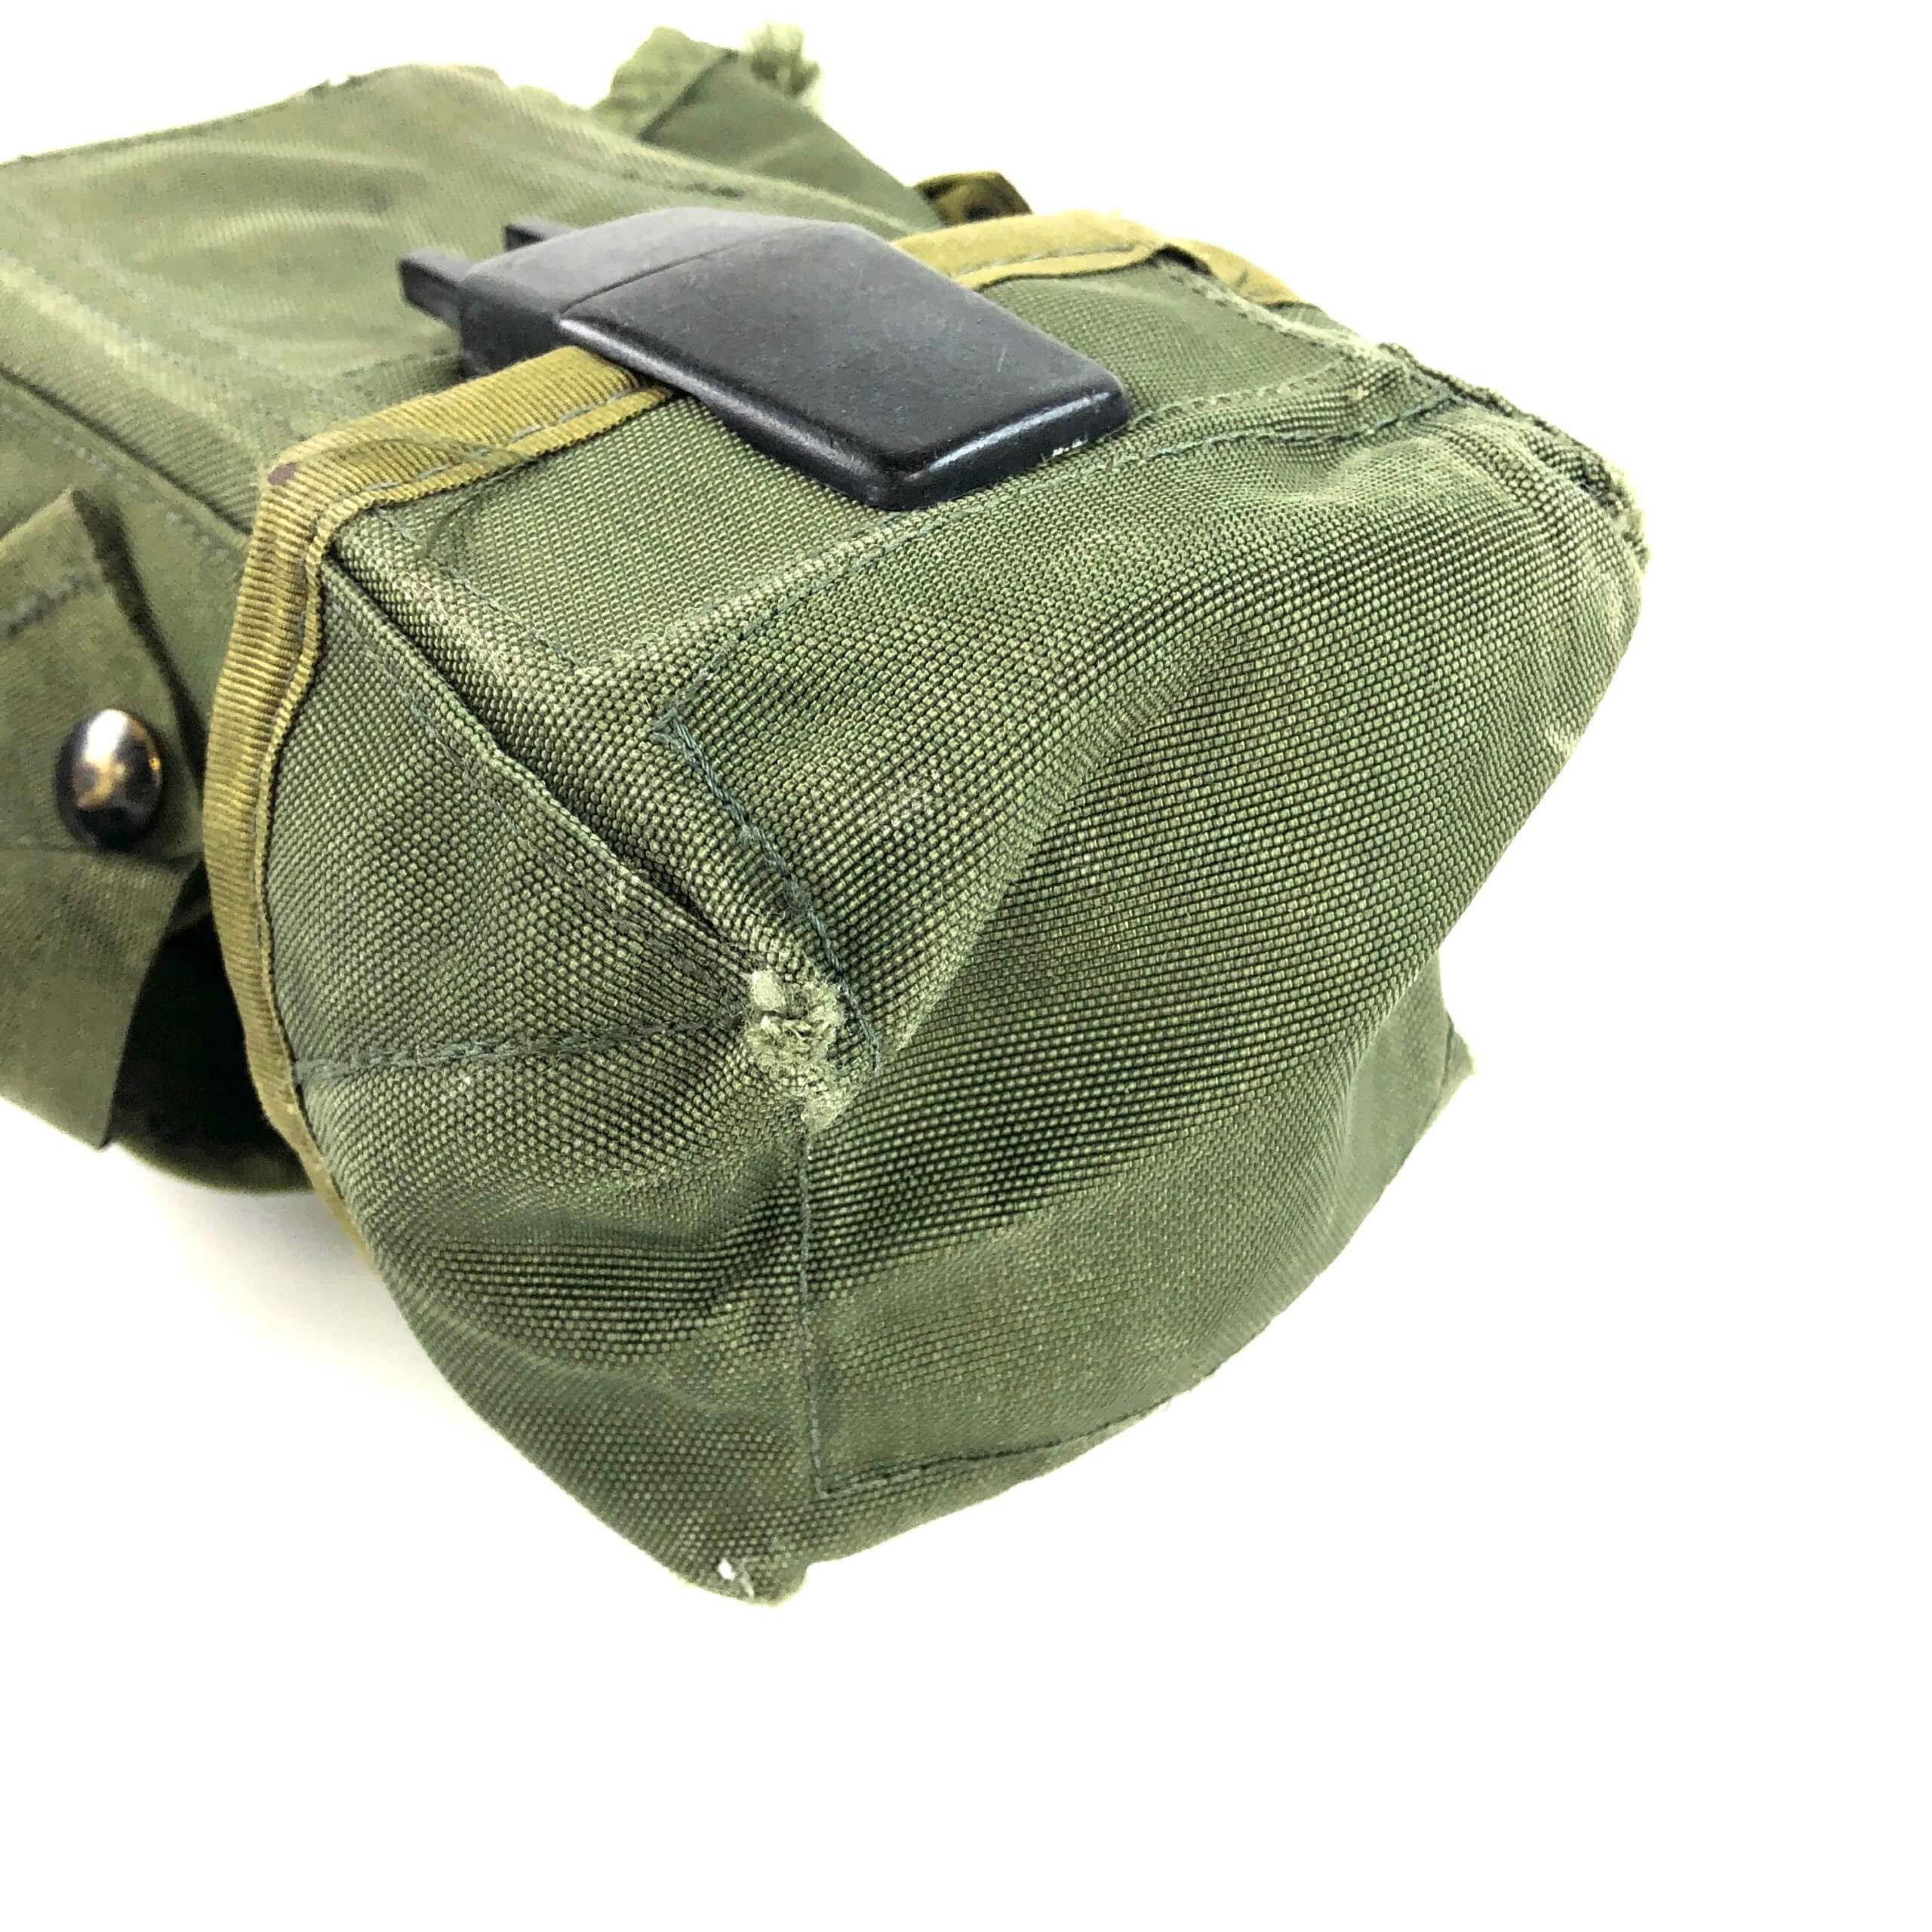 2 M1972 Small Arms Ammo Cases Pouch ALICE Olive Drab Pouches Ammunition DEFECT 